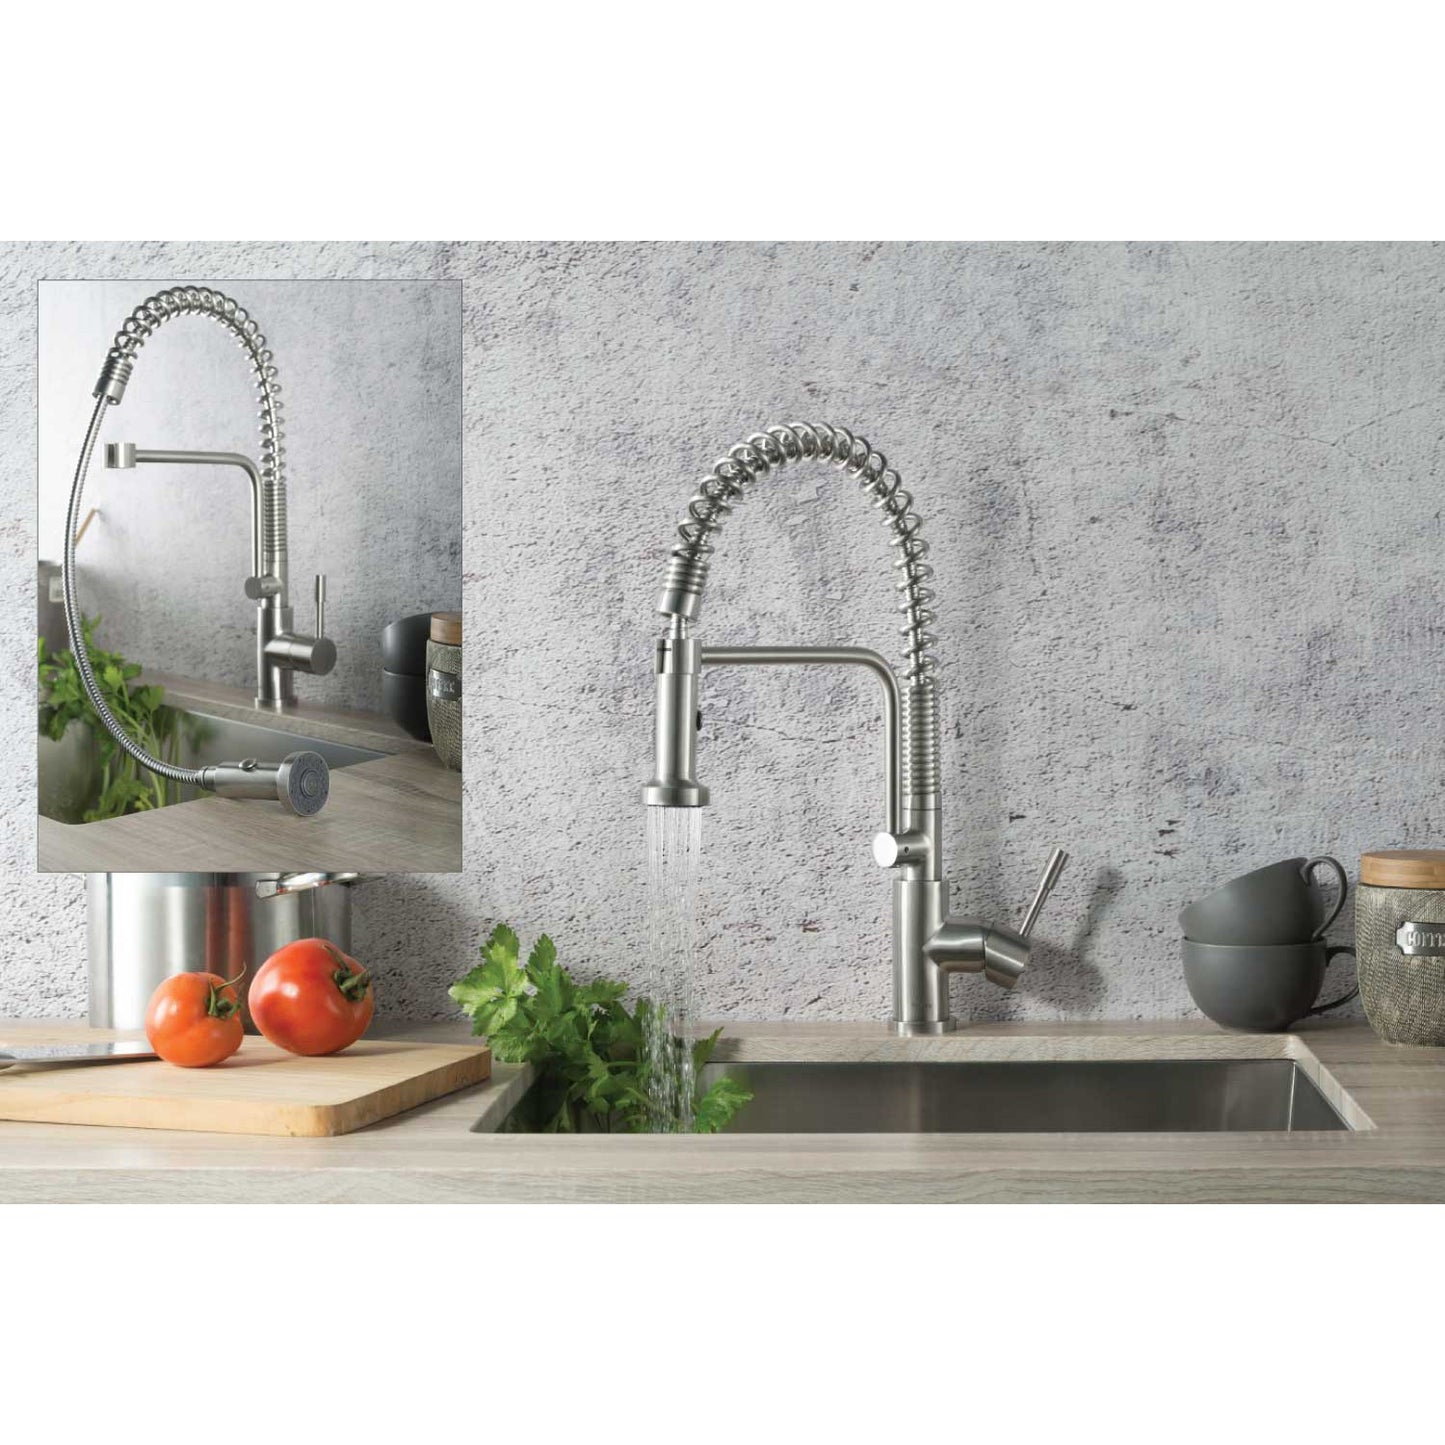 Isenberg Klassiker Caso 19" Single Hole Light Verde Semi-Professional Stainless Steel Pull-Down Kitchen Faucet With Dual Function Sprayer